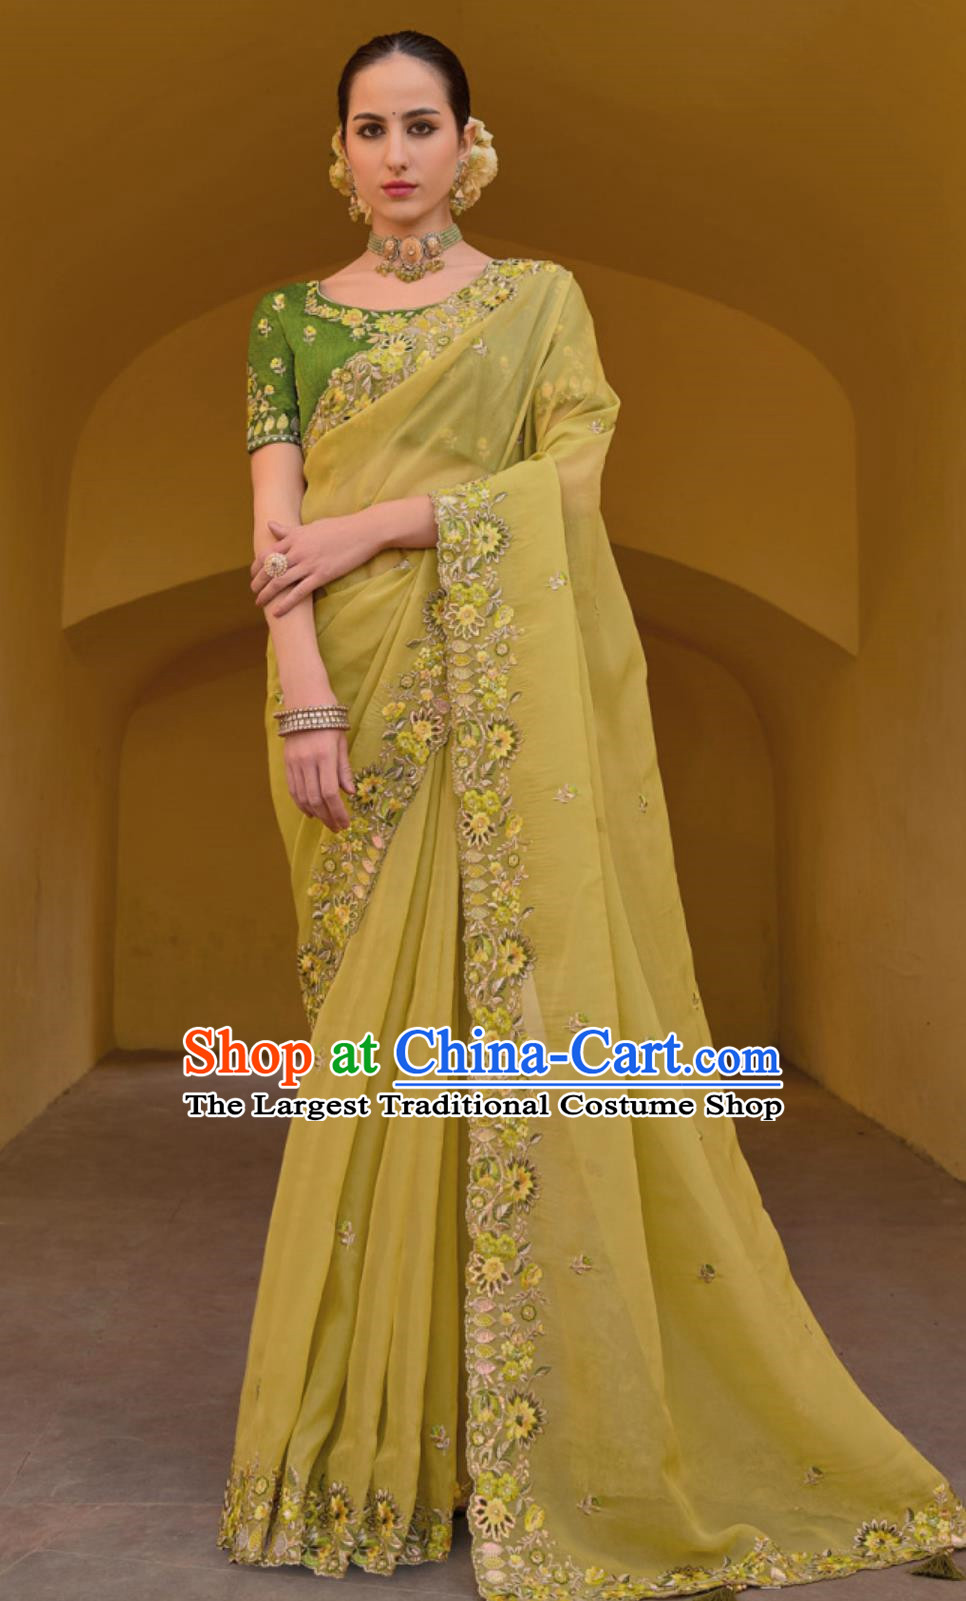 Hollow Embroidery Indian Saree National Women Yellow Wrap Skirt Sari Festival Party Outfit